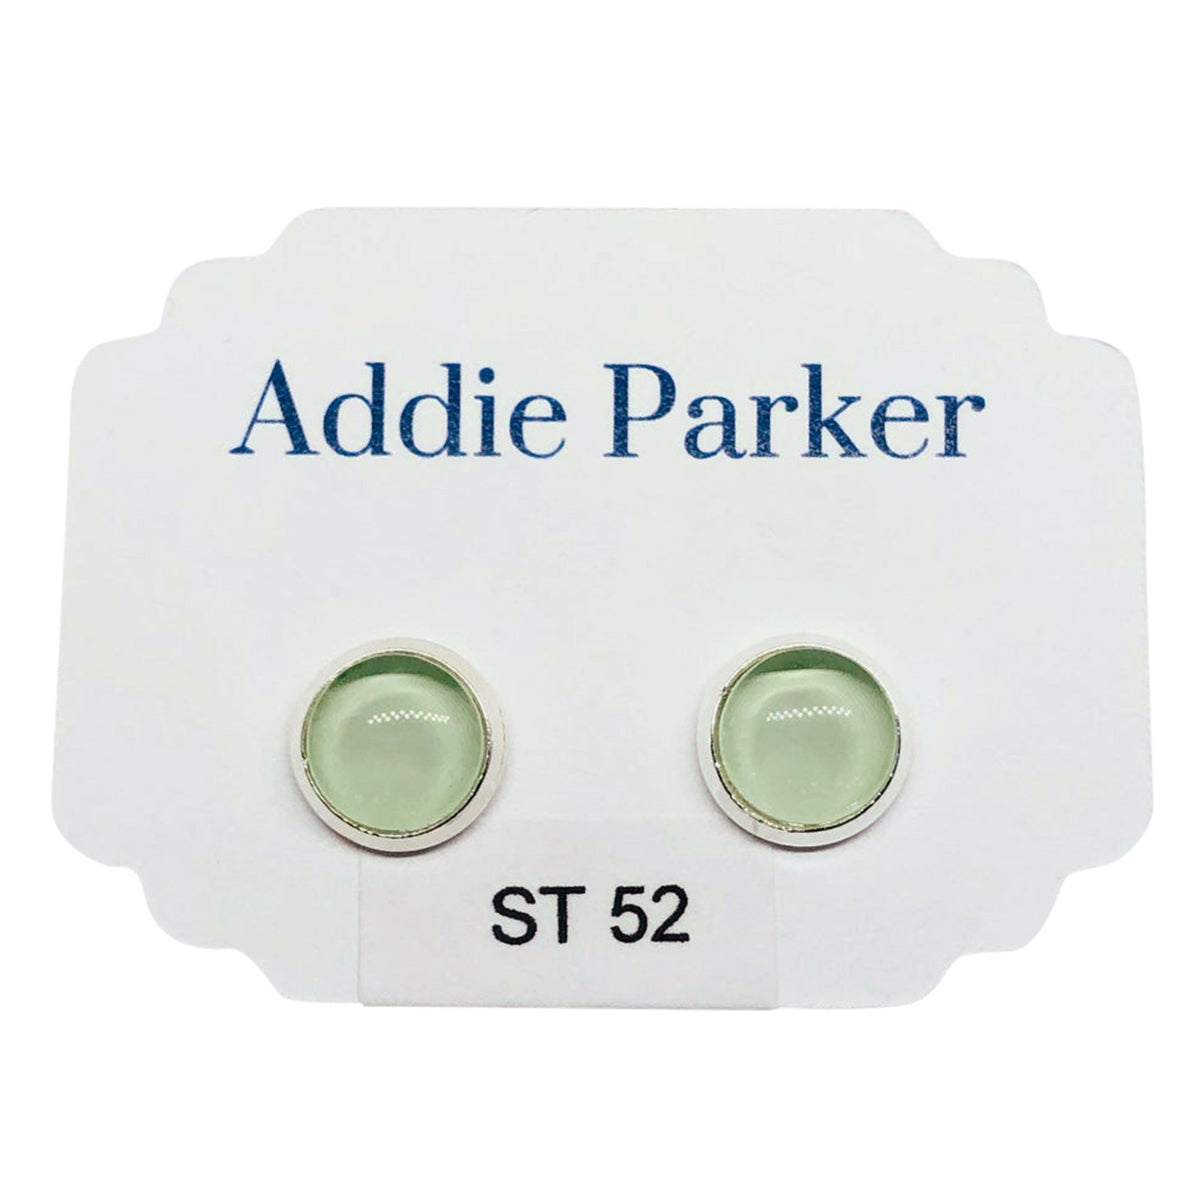 Name badge reading &quot;ADDIE PARKER EARRINGS STUD SET LIGHT GREEN SOLID&quot; with two nickel-free magnetic attachments on the back.